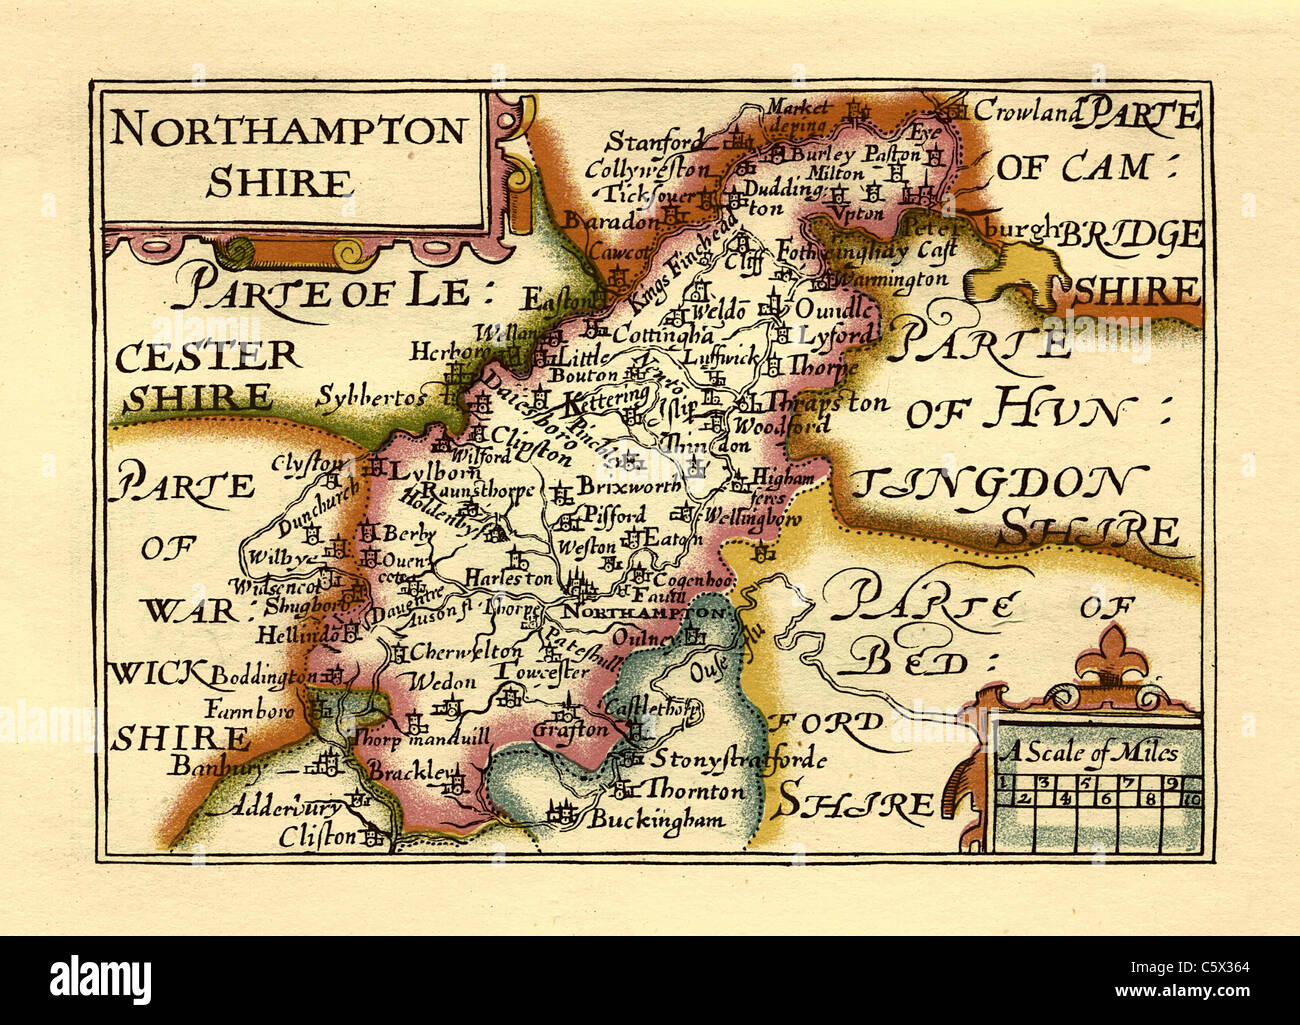 Northamptonshire - Old English County Map by John Speed, circa 1625 Stock Photo